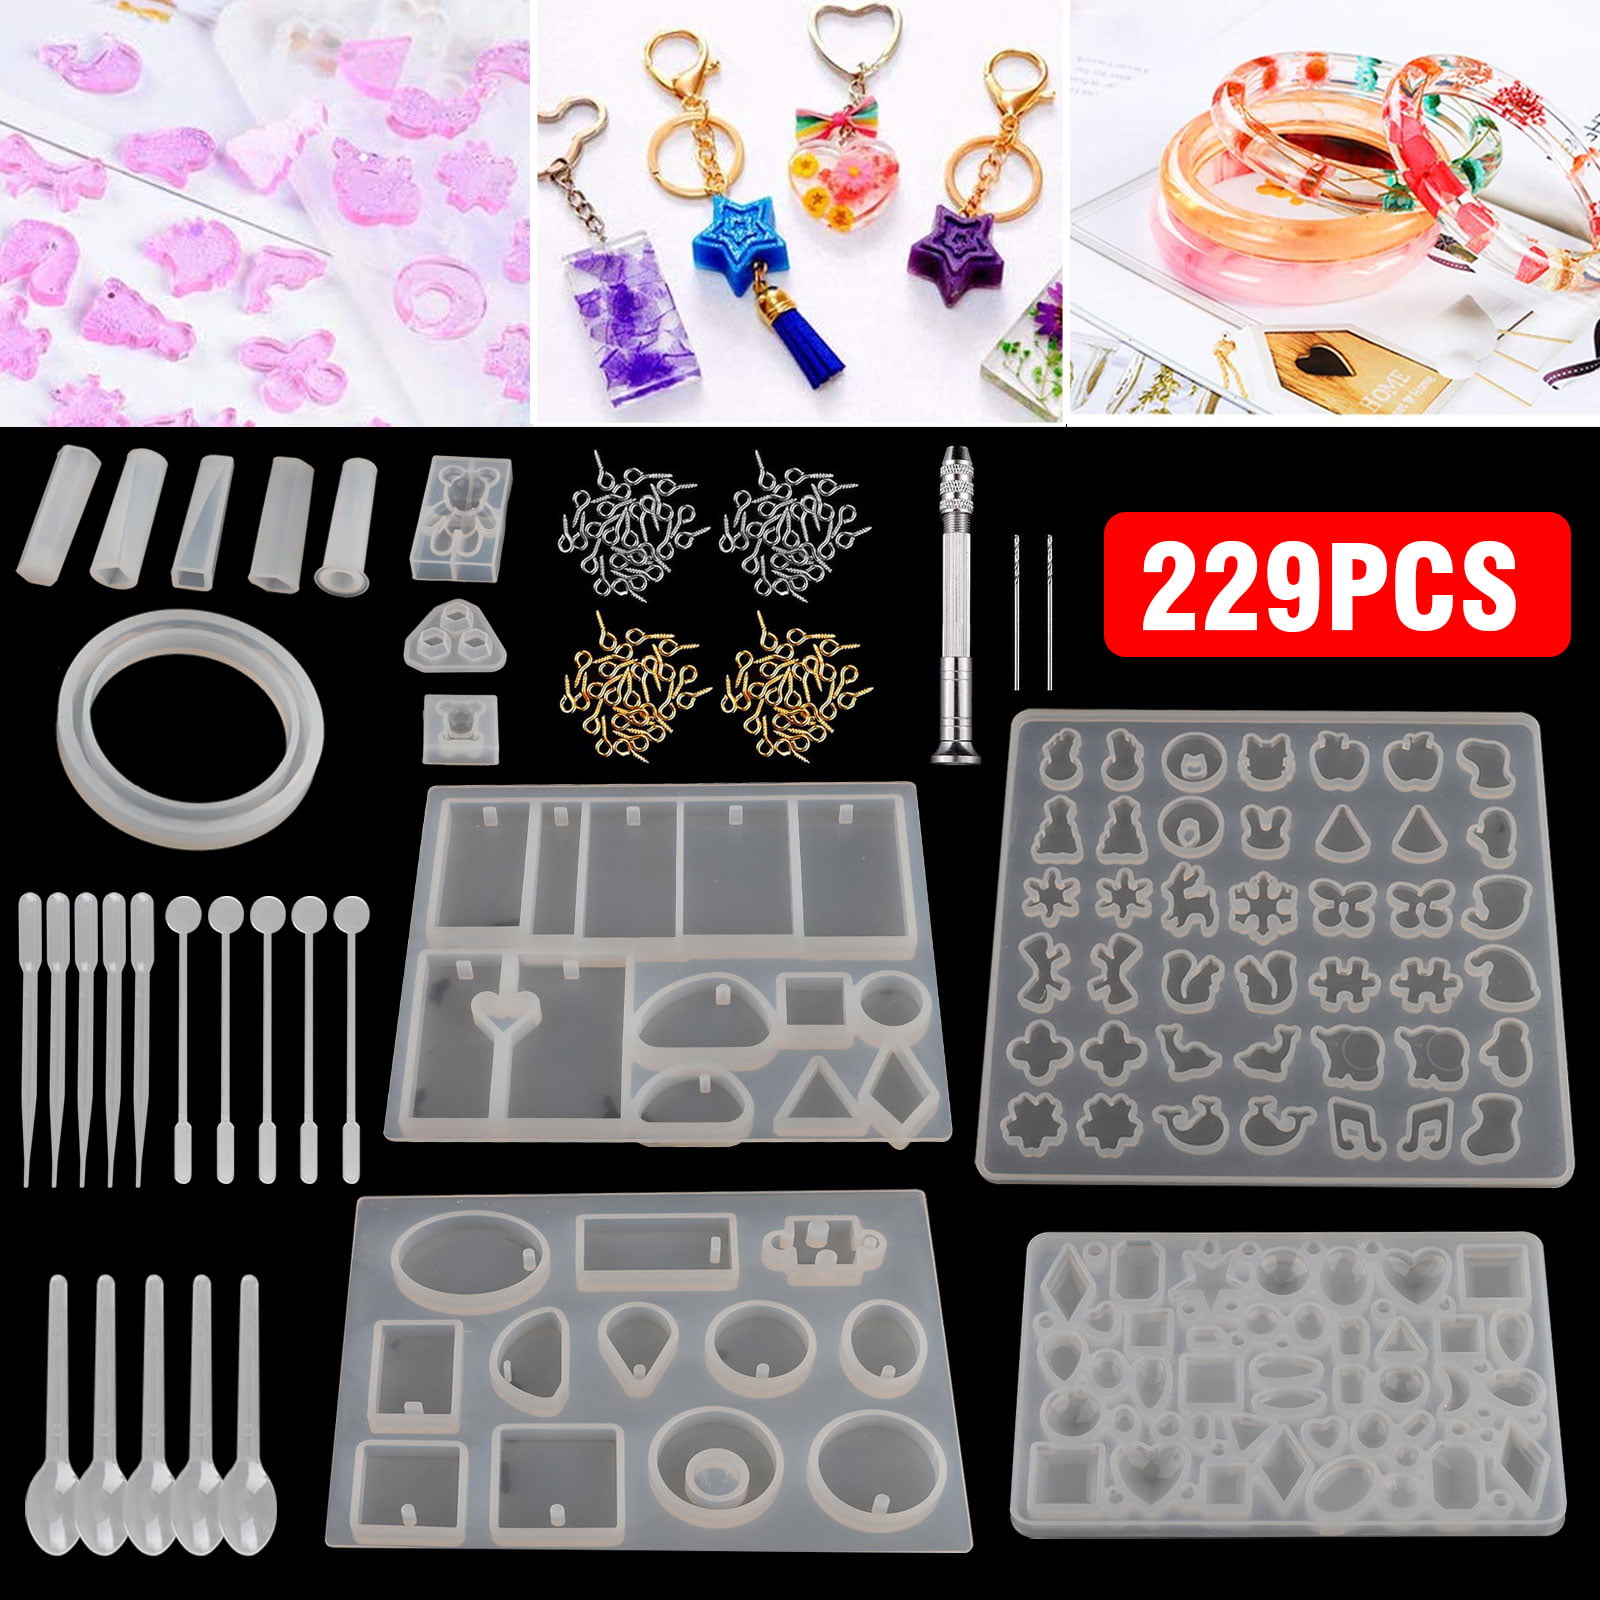 DIY Silicone Resin Mold Jewelry Epoxy Pendant Making Tool Mould Craft Handmade 